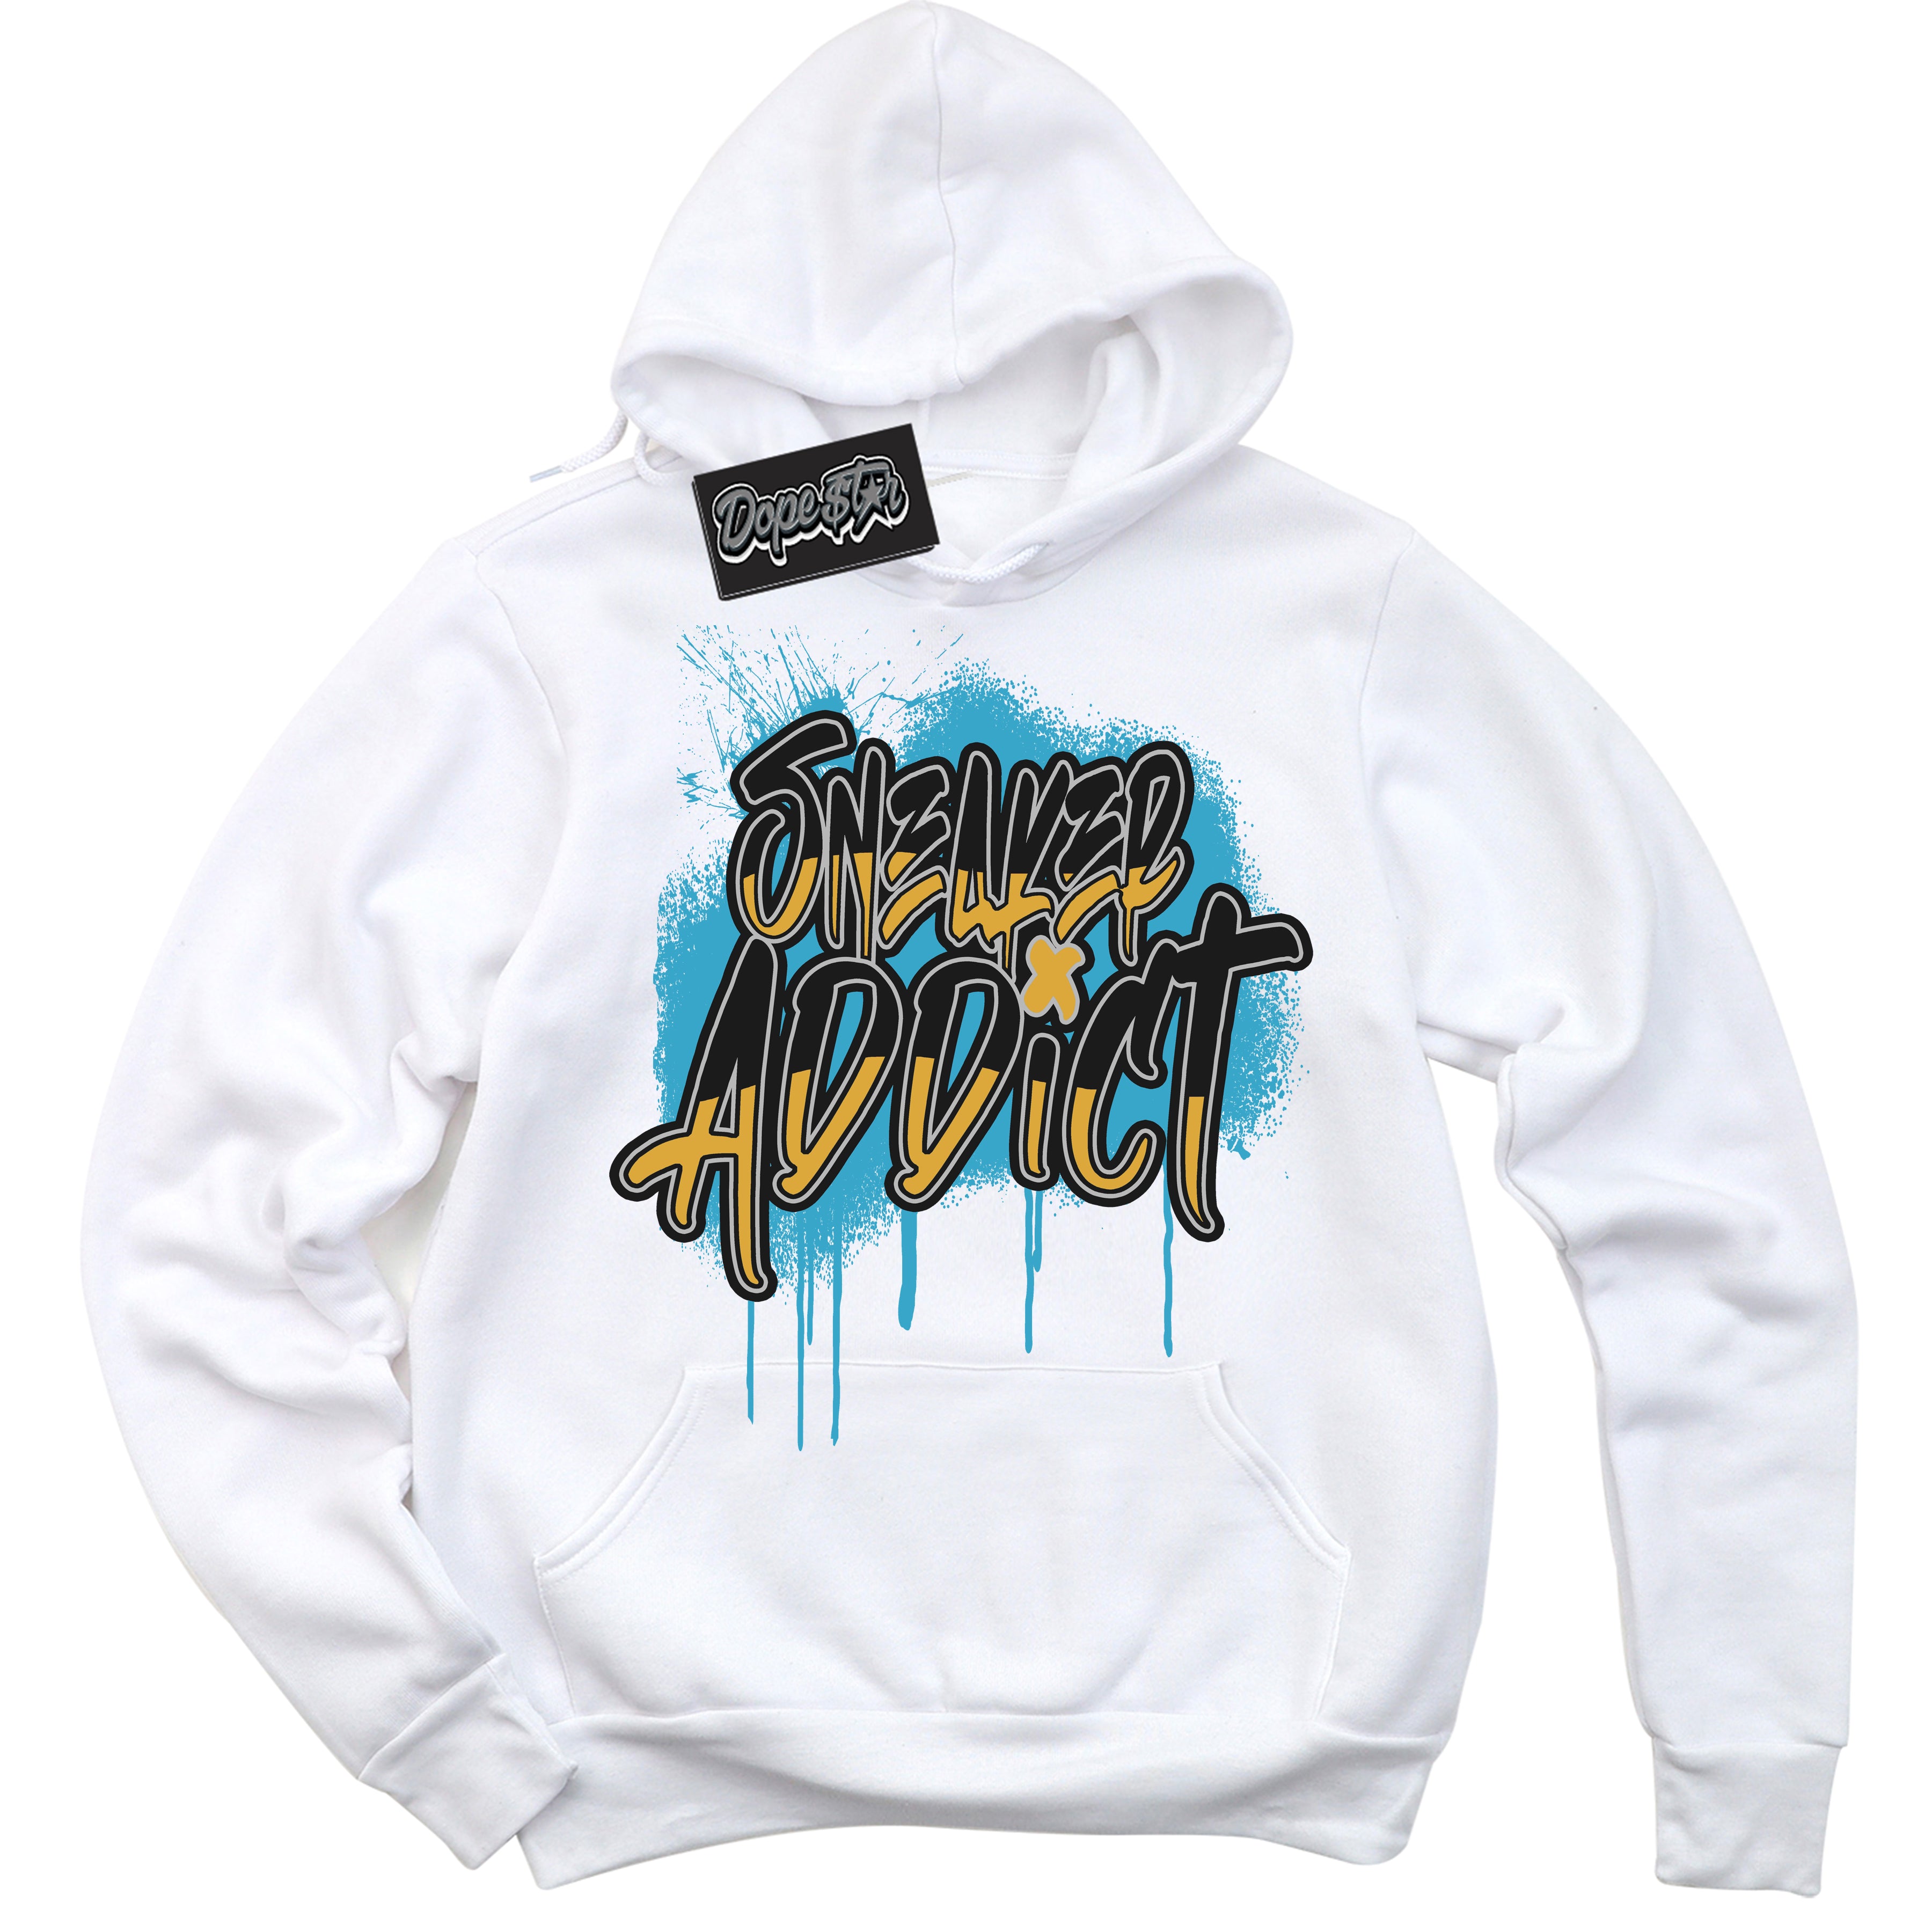 Cool White Graphic Hoodie with “ Sneaker addict “ print, that perfectly matches Air Jordan 5 AQUA  sneakers